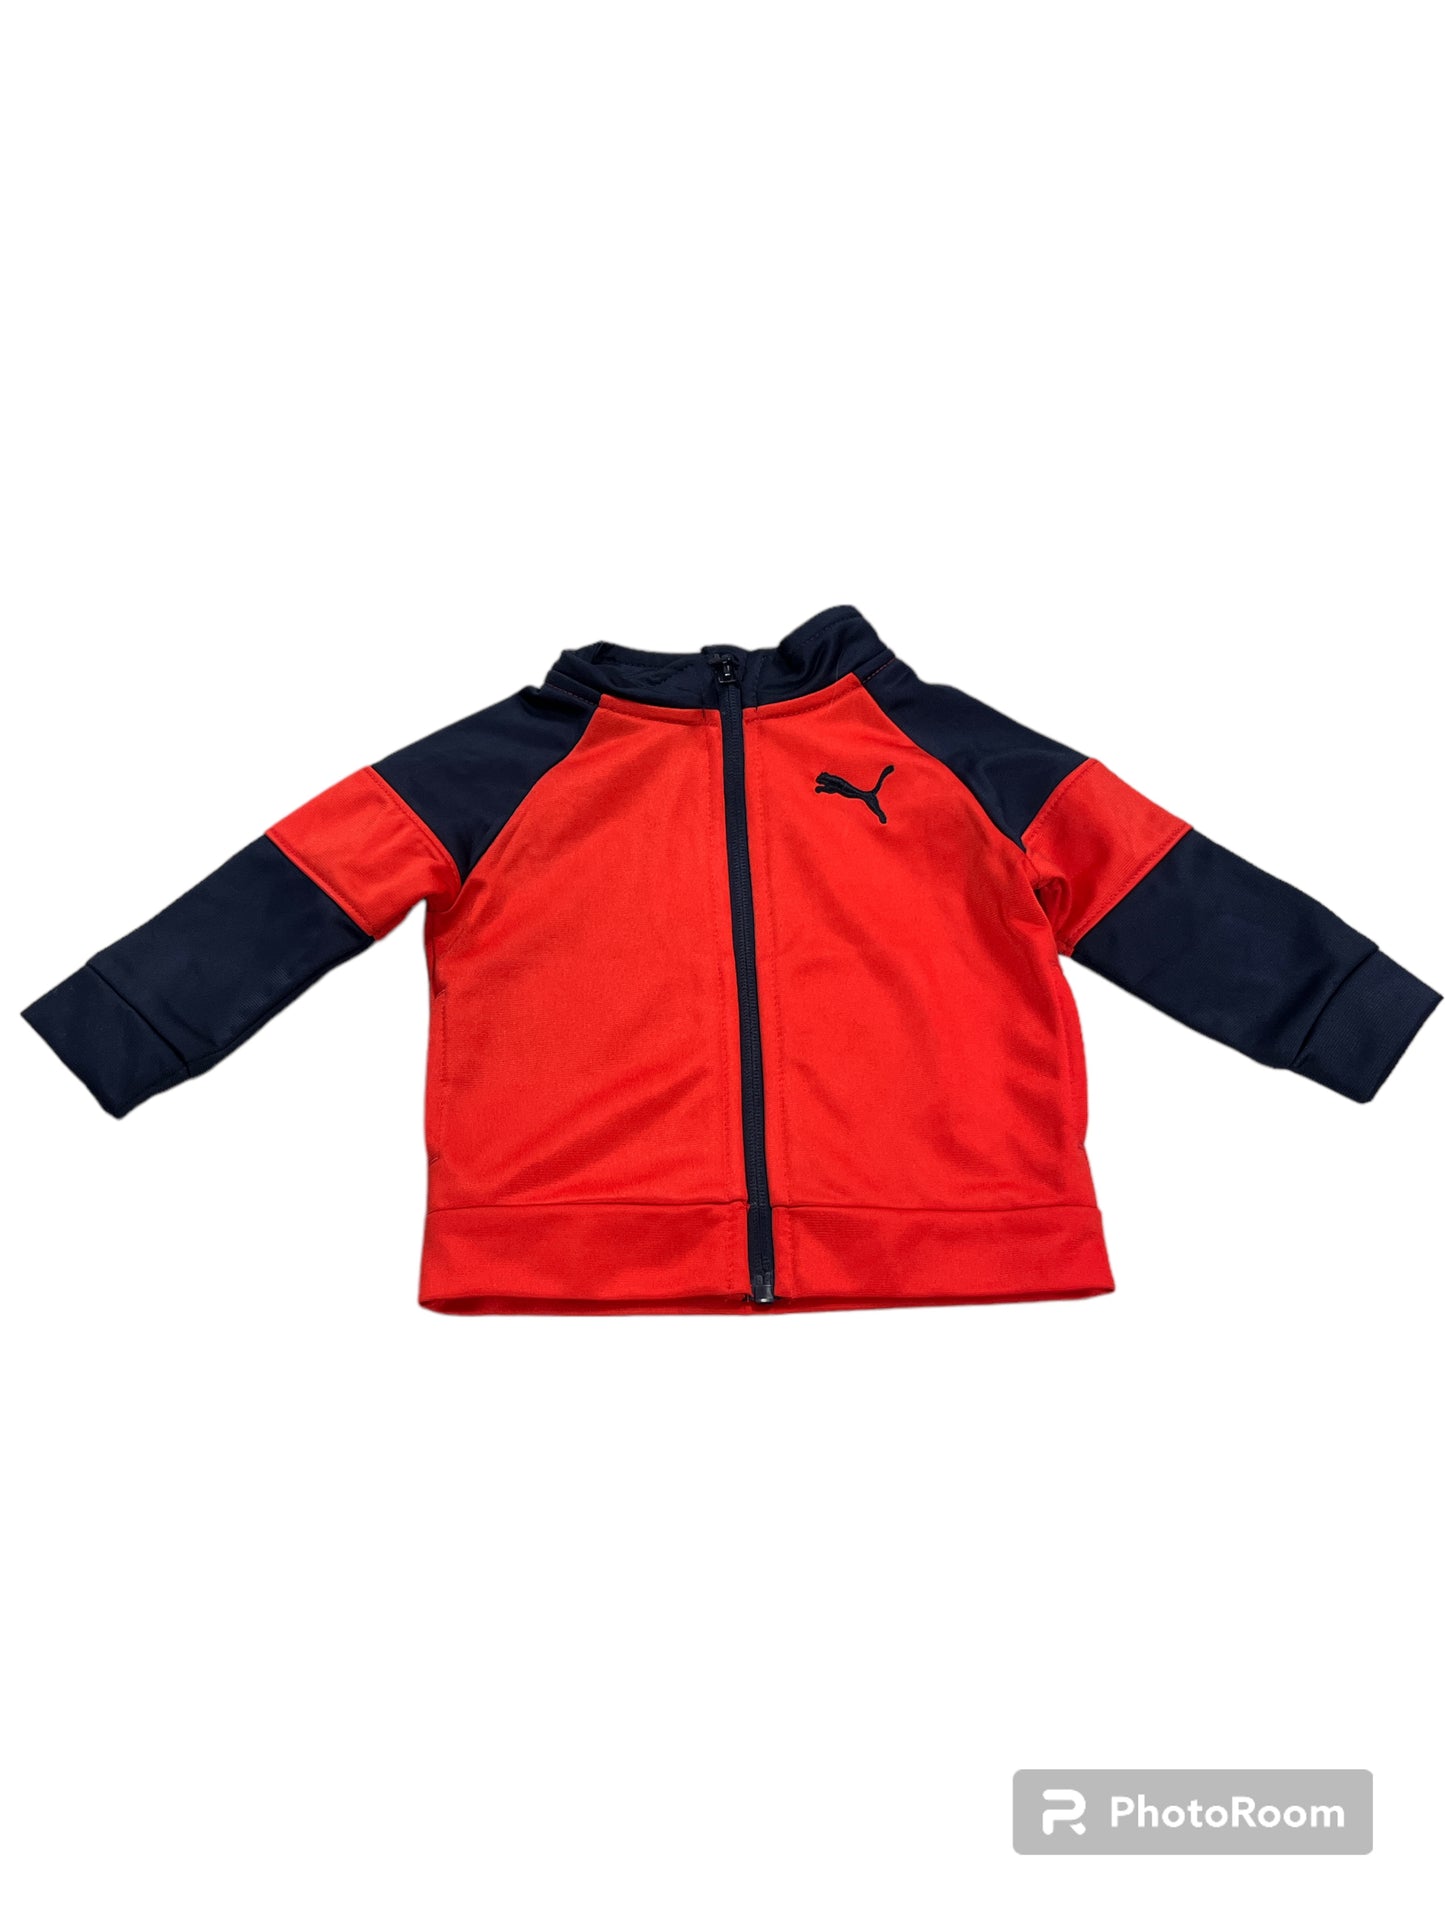 BNWT Red and Blue Zip Up Size 3-6m